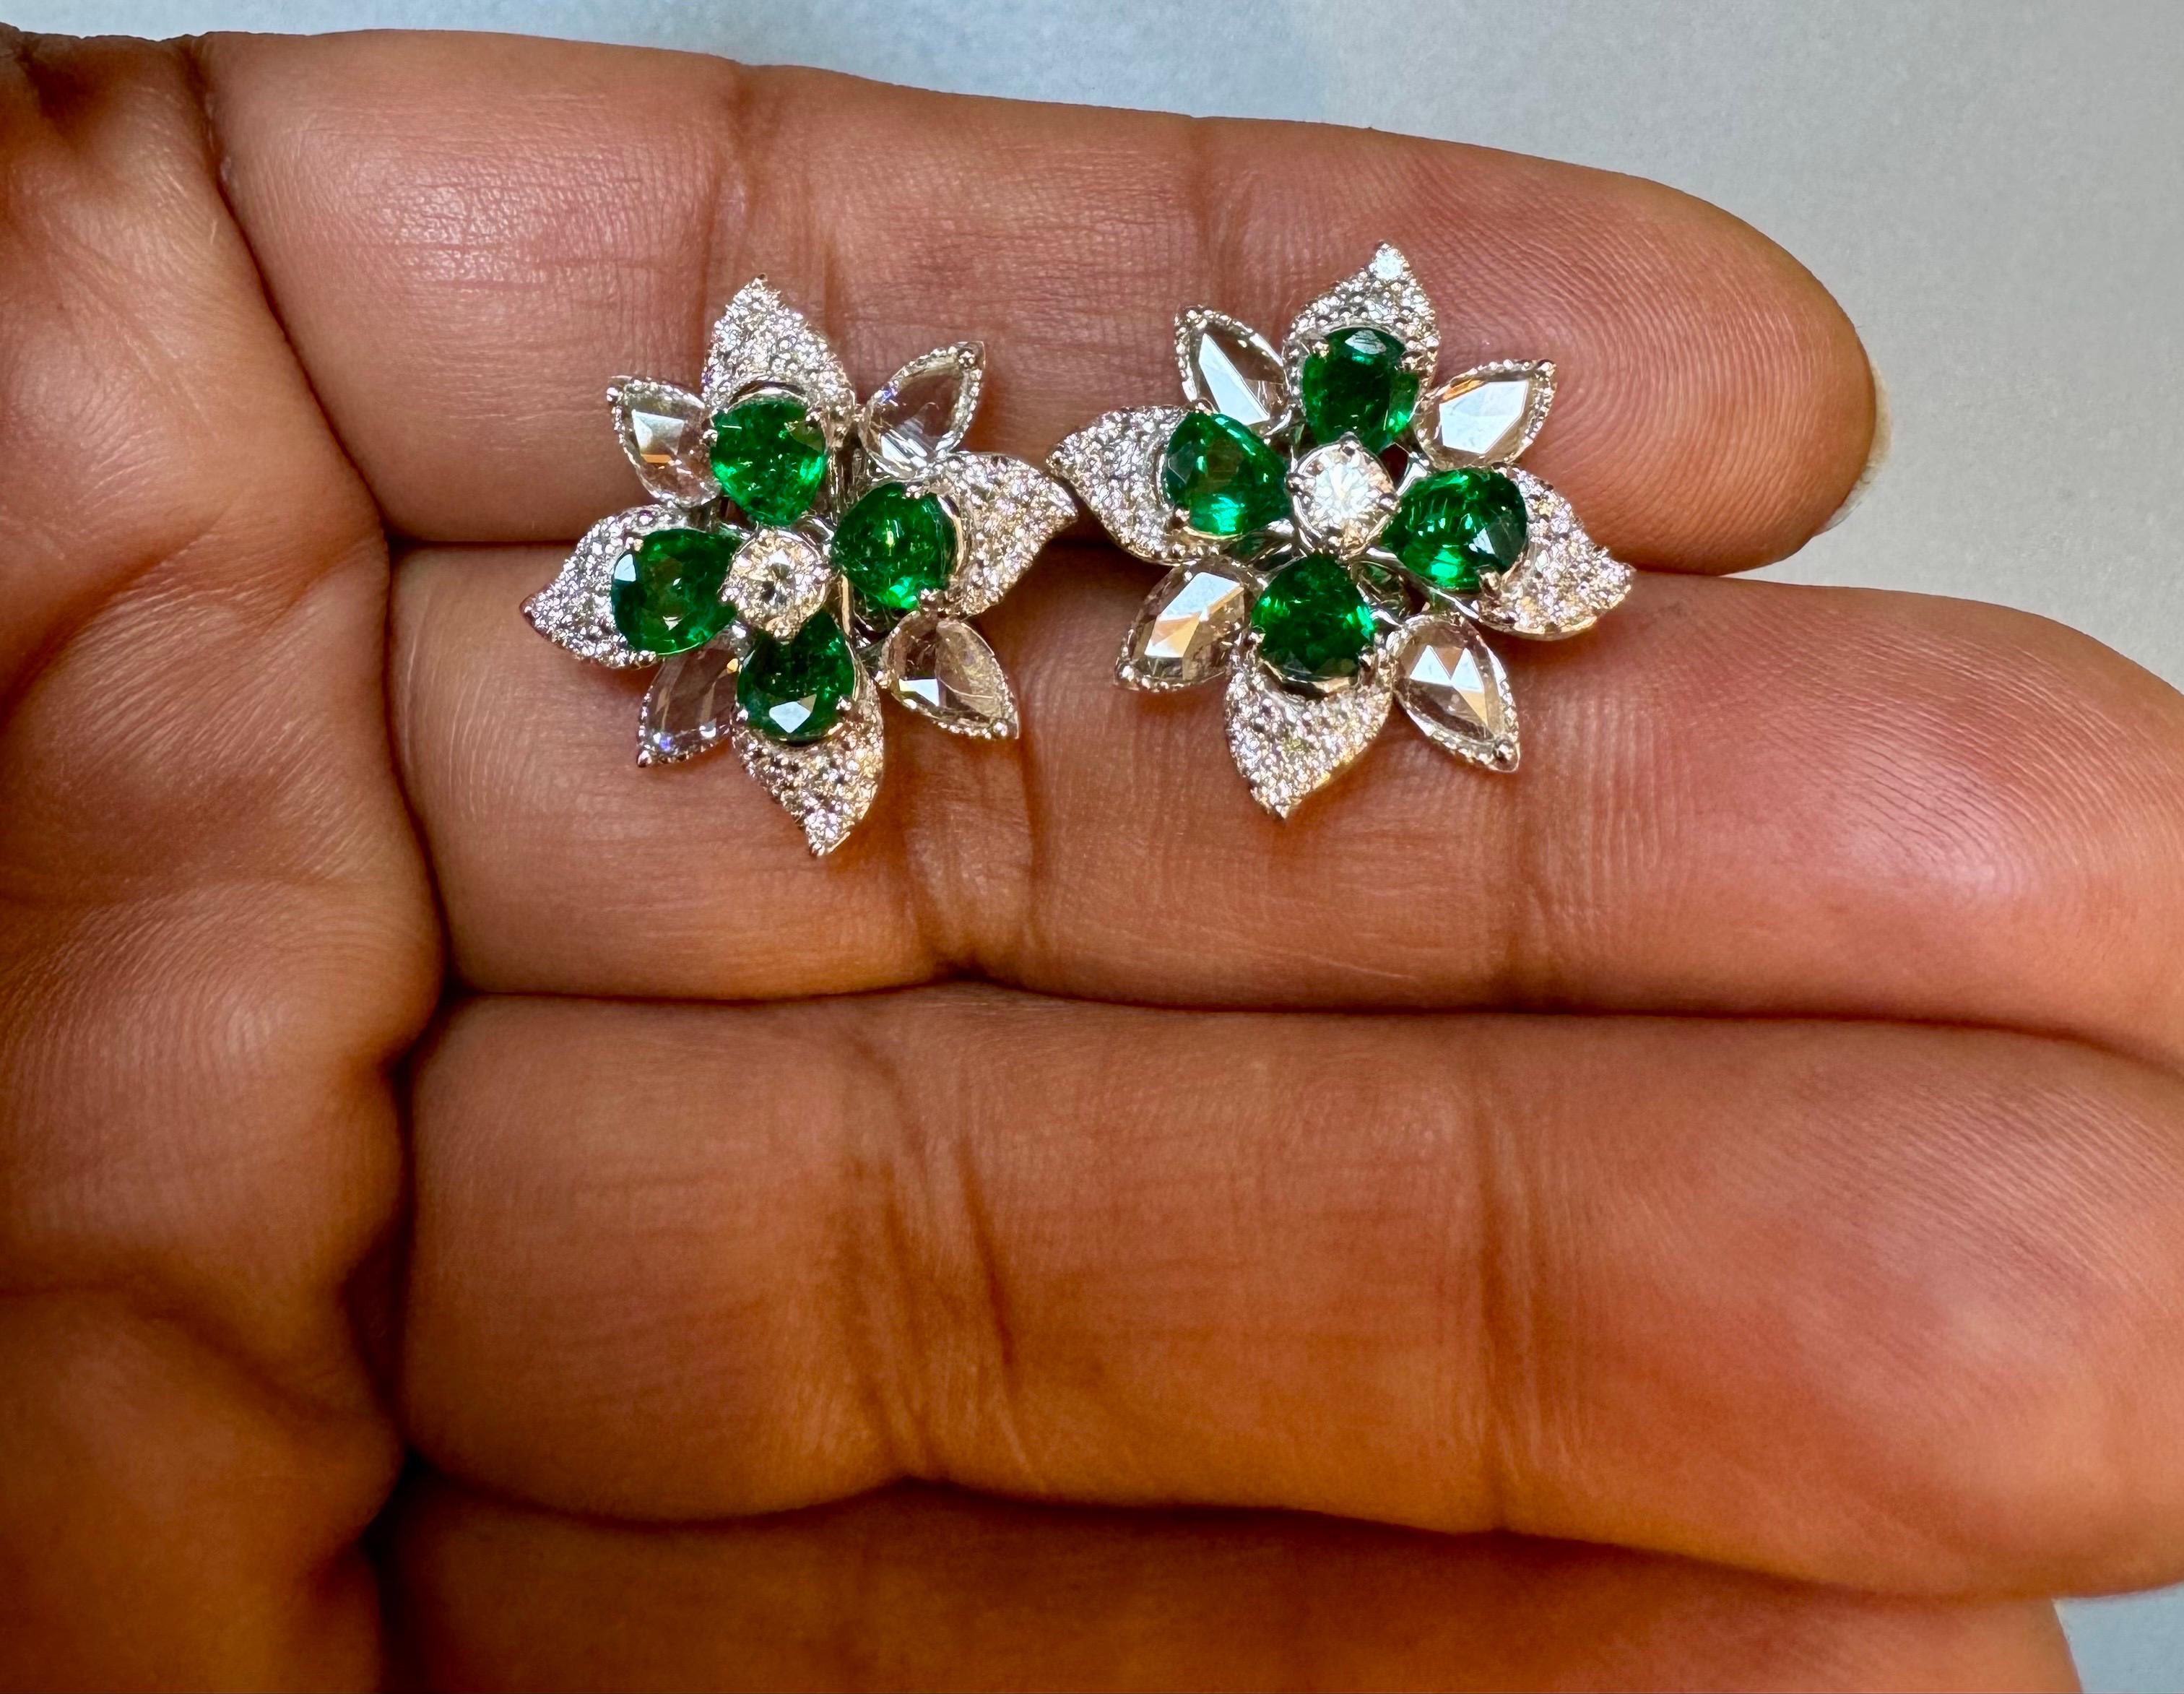 2.2Ct Natural Zambian Emerald  & 1.75 Ct Diamond & Rose cut Diamond Earring 18KG
 
This exquisite pair of earrings are beautifully crafted in 18 Karat white gold
Weight of 18 Karat gold is 10.3 Grams with emeralds.
8 Extreme fine pear shape